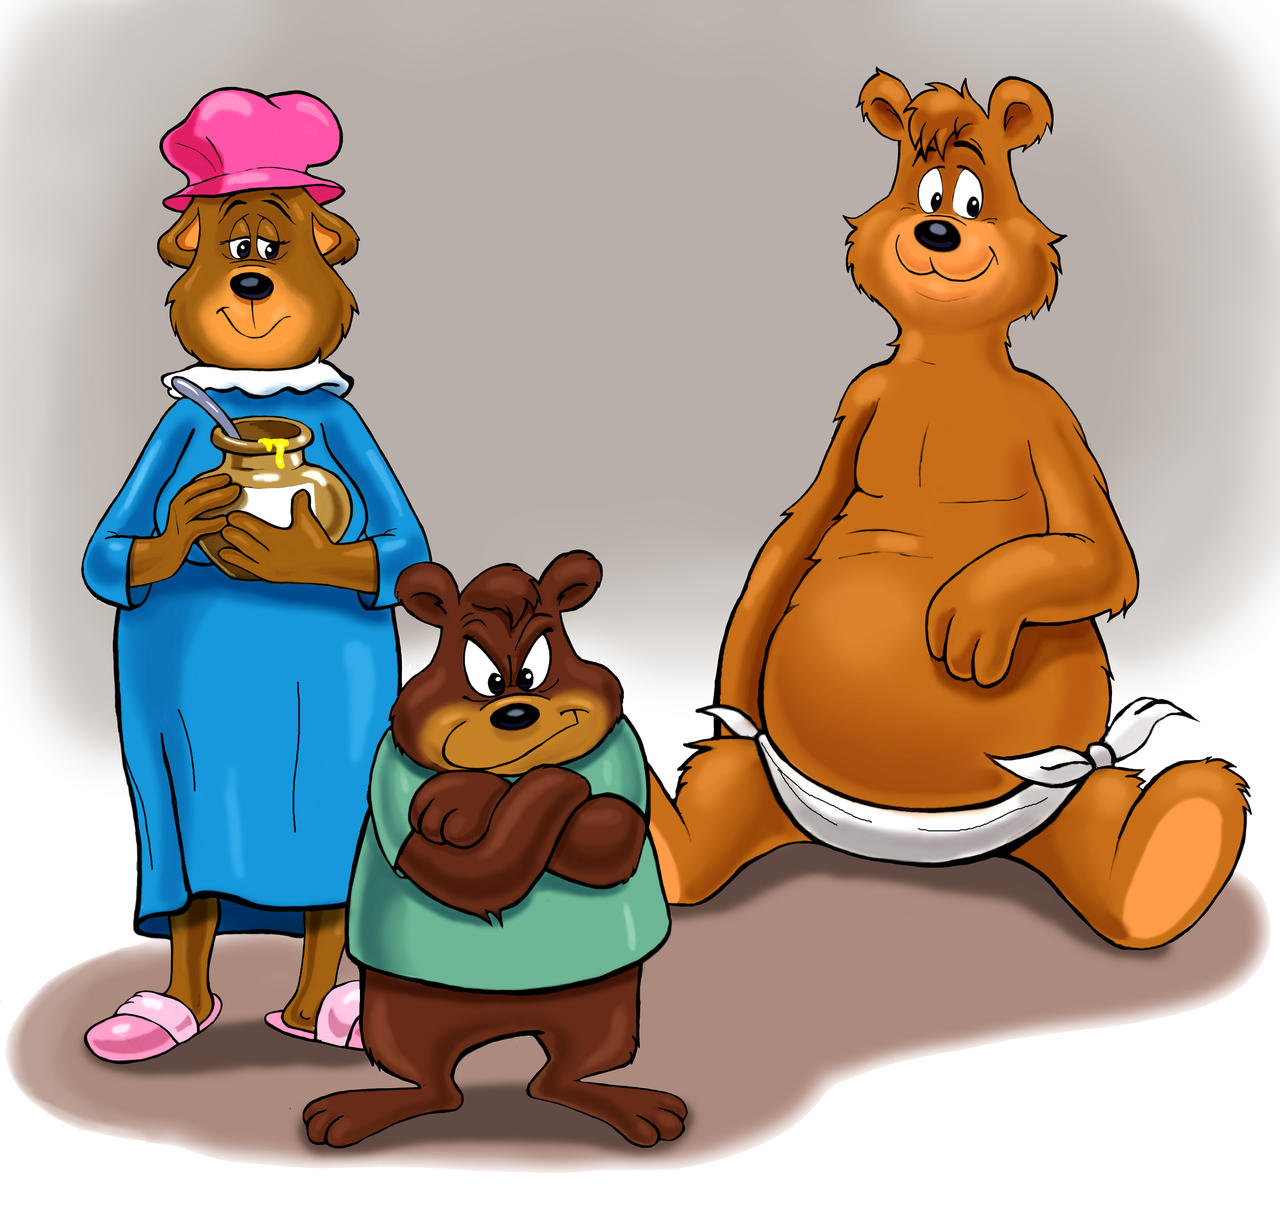 The Three Bears (Looney Tunes) by zdrer456 on DeviantArt